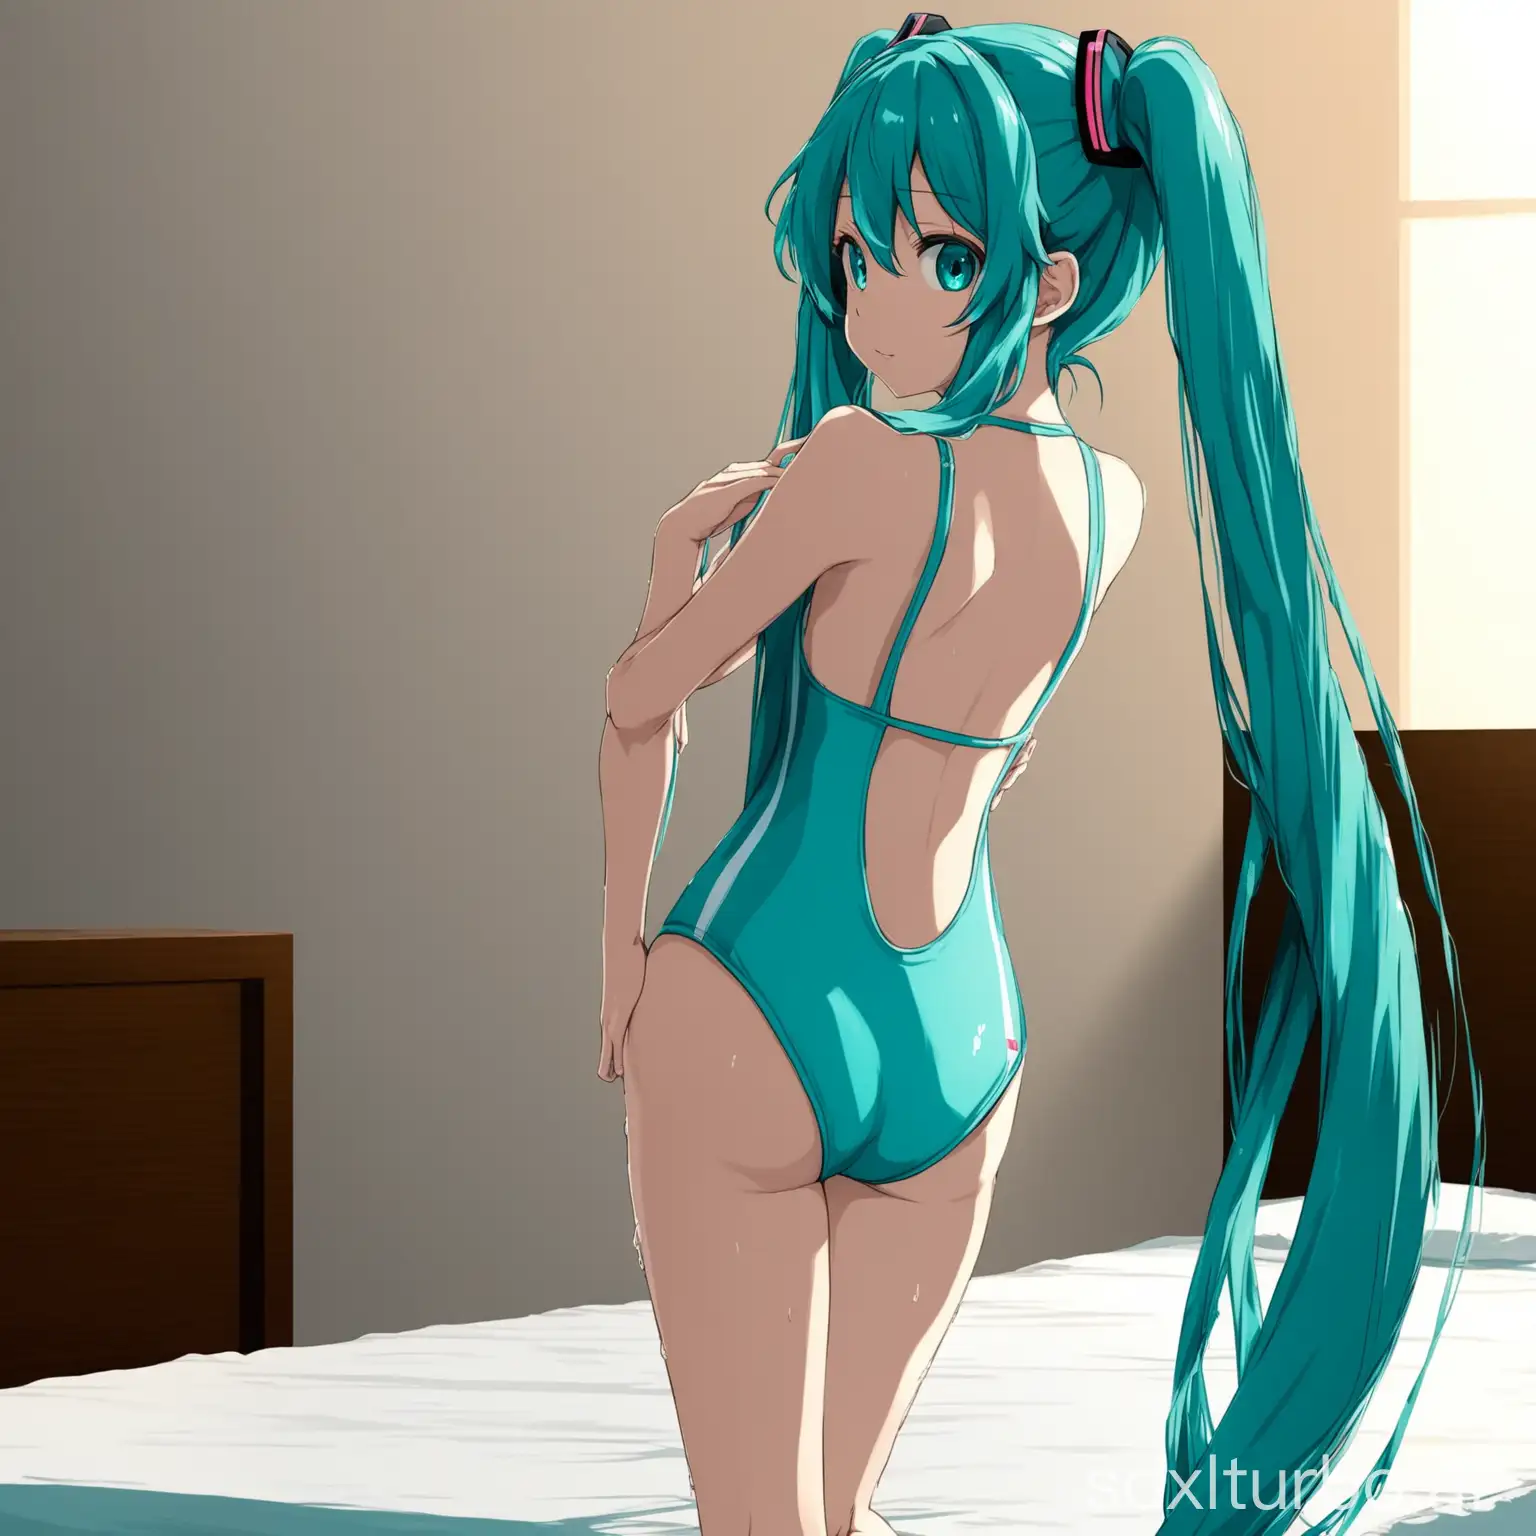 Hatsune Miku wearing a swimsuit, leaning on the bed lifting one leg, looking back at the camera